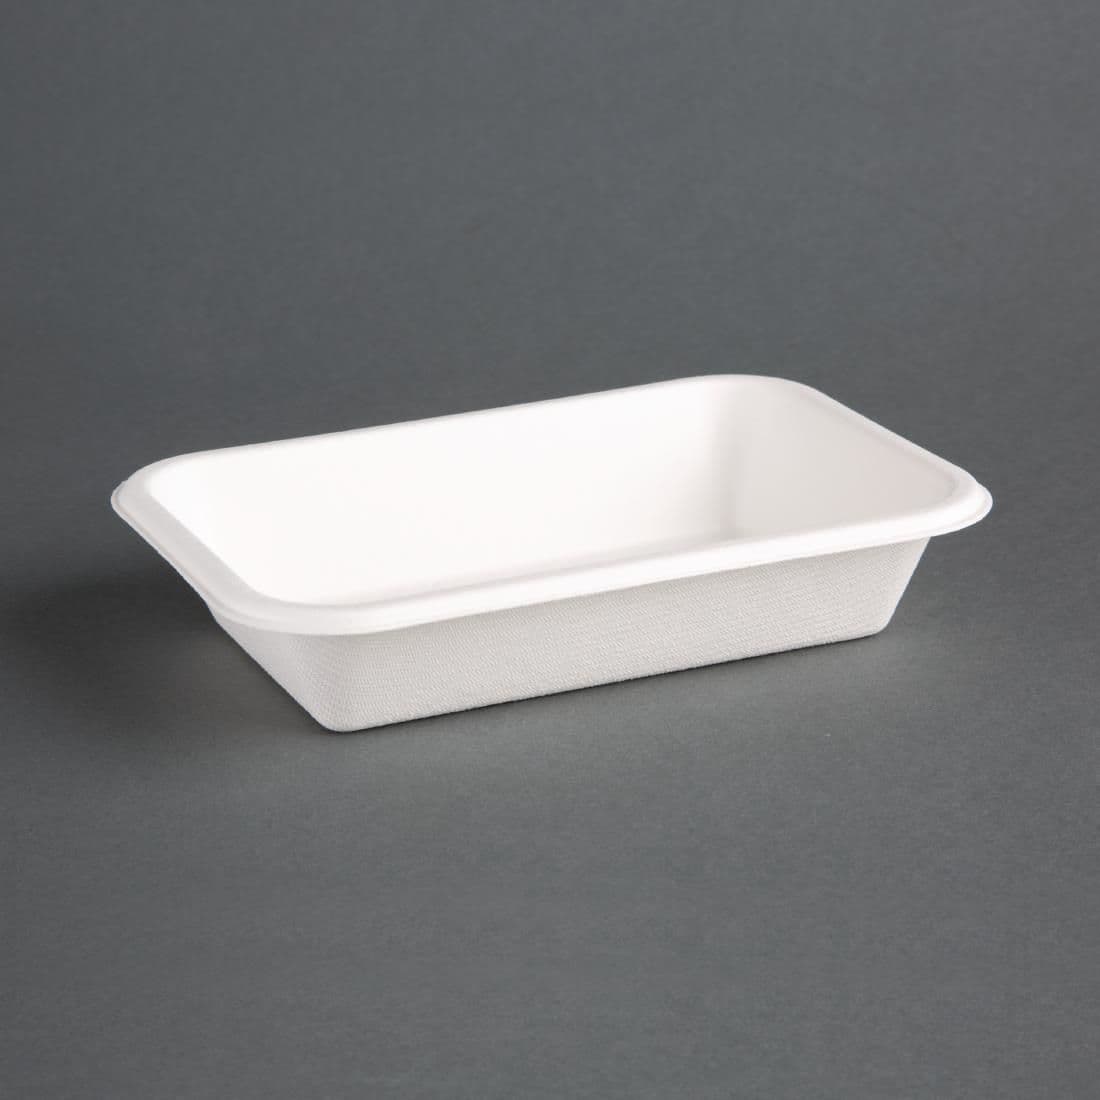 Fiesta Green Compostable Bagasse Food Trays 16oz (Pack of 50) JD Catering Equipment Solutions Ltd